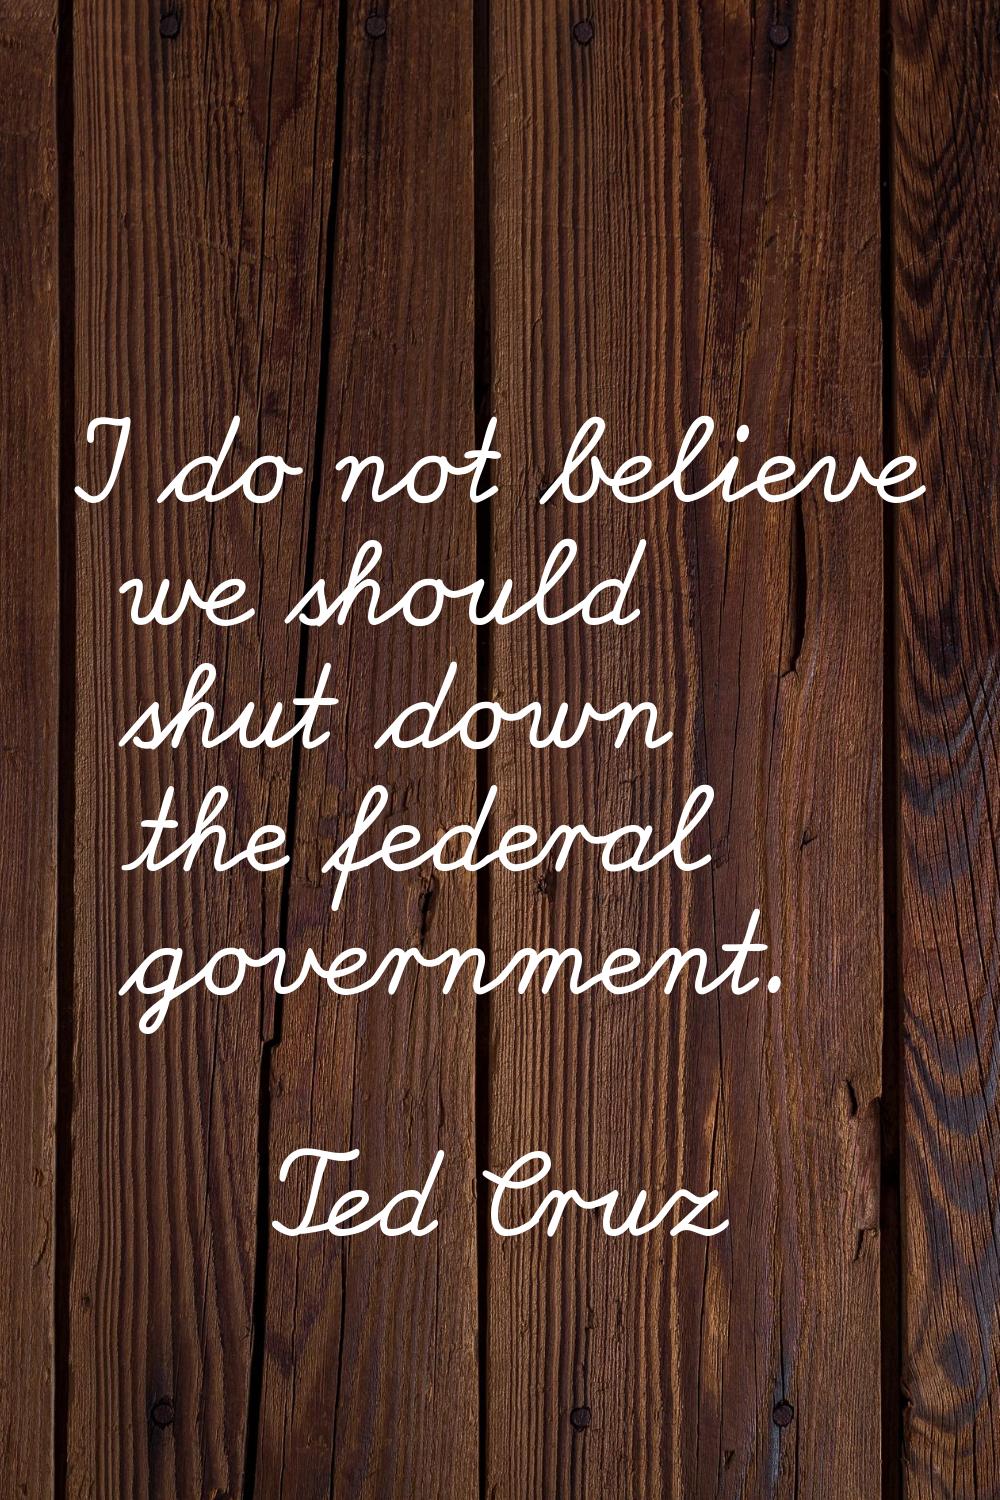 I do not believe we should shut down the federal government.